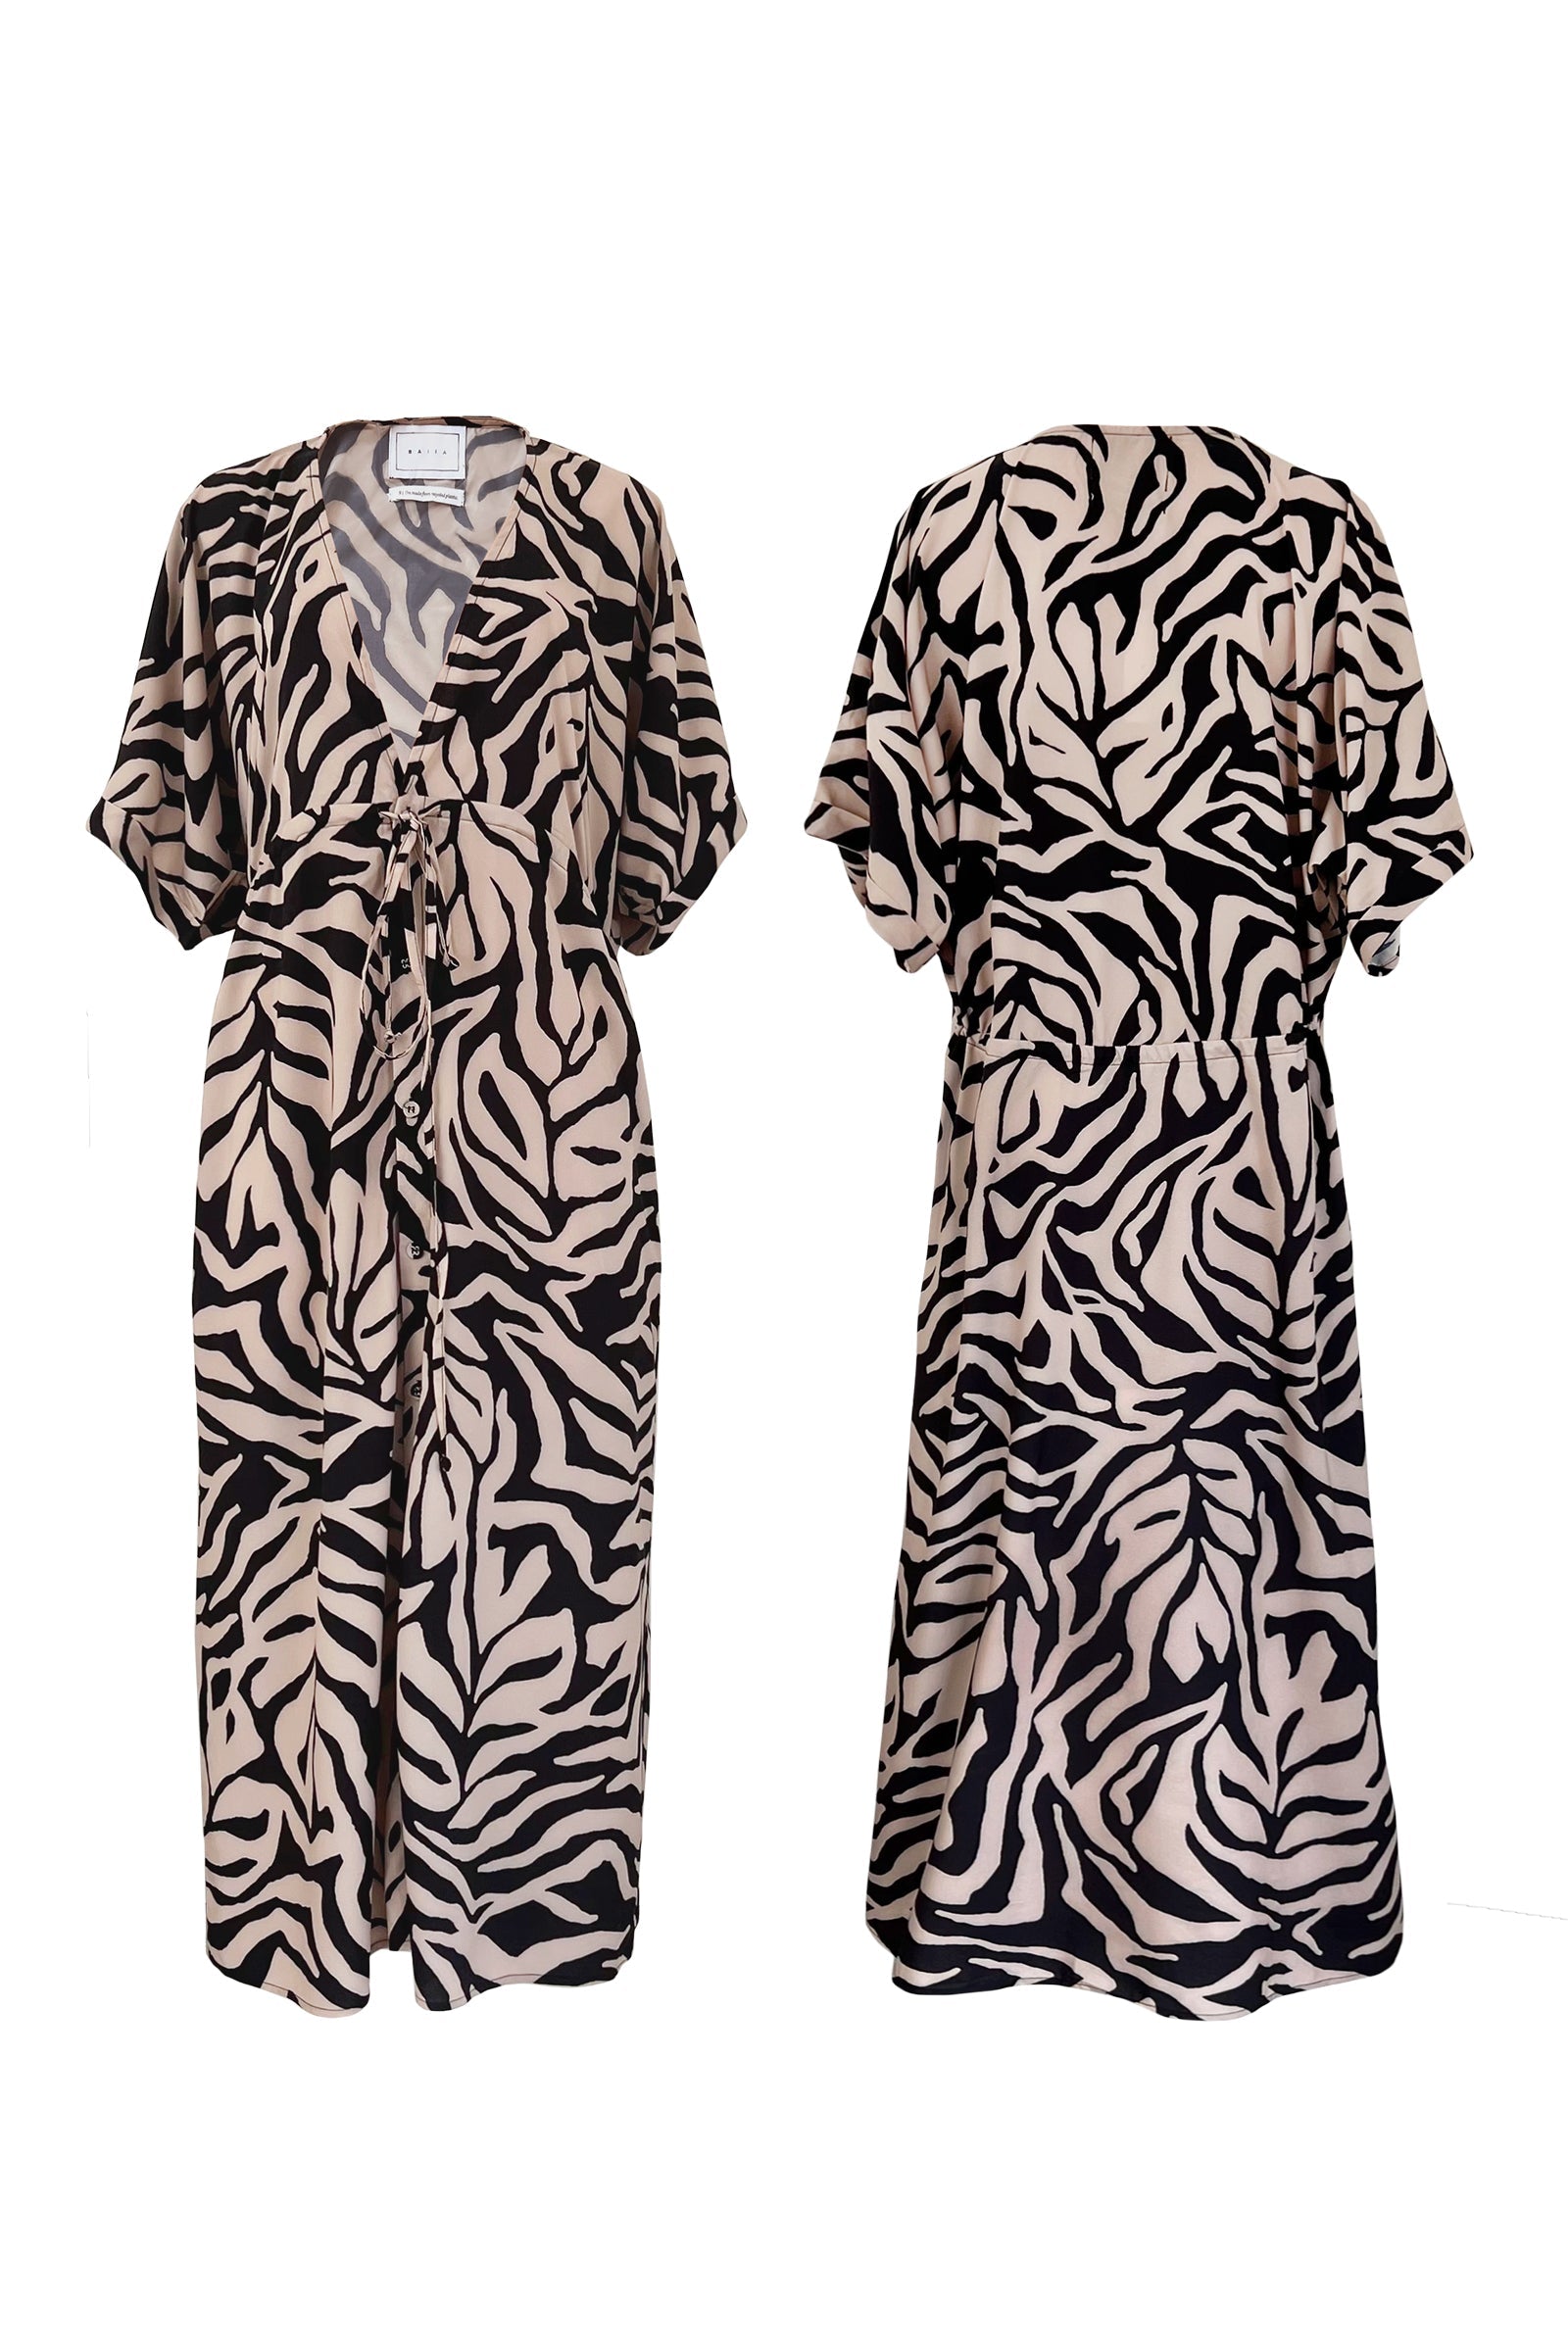 Back and front full length view of the Tulum animal print kaftan dress